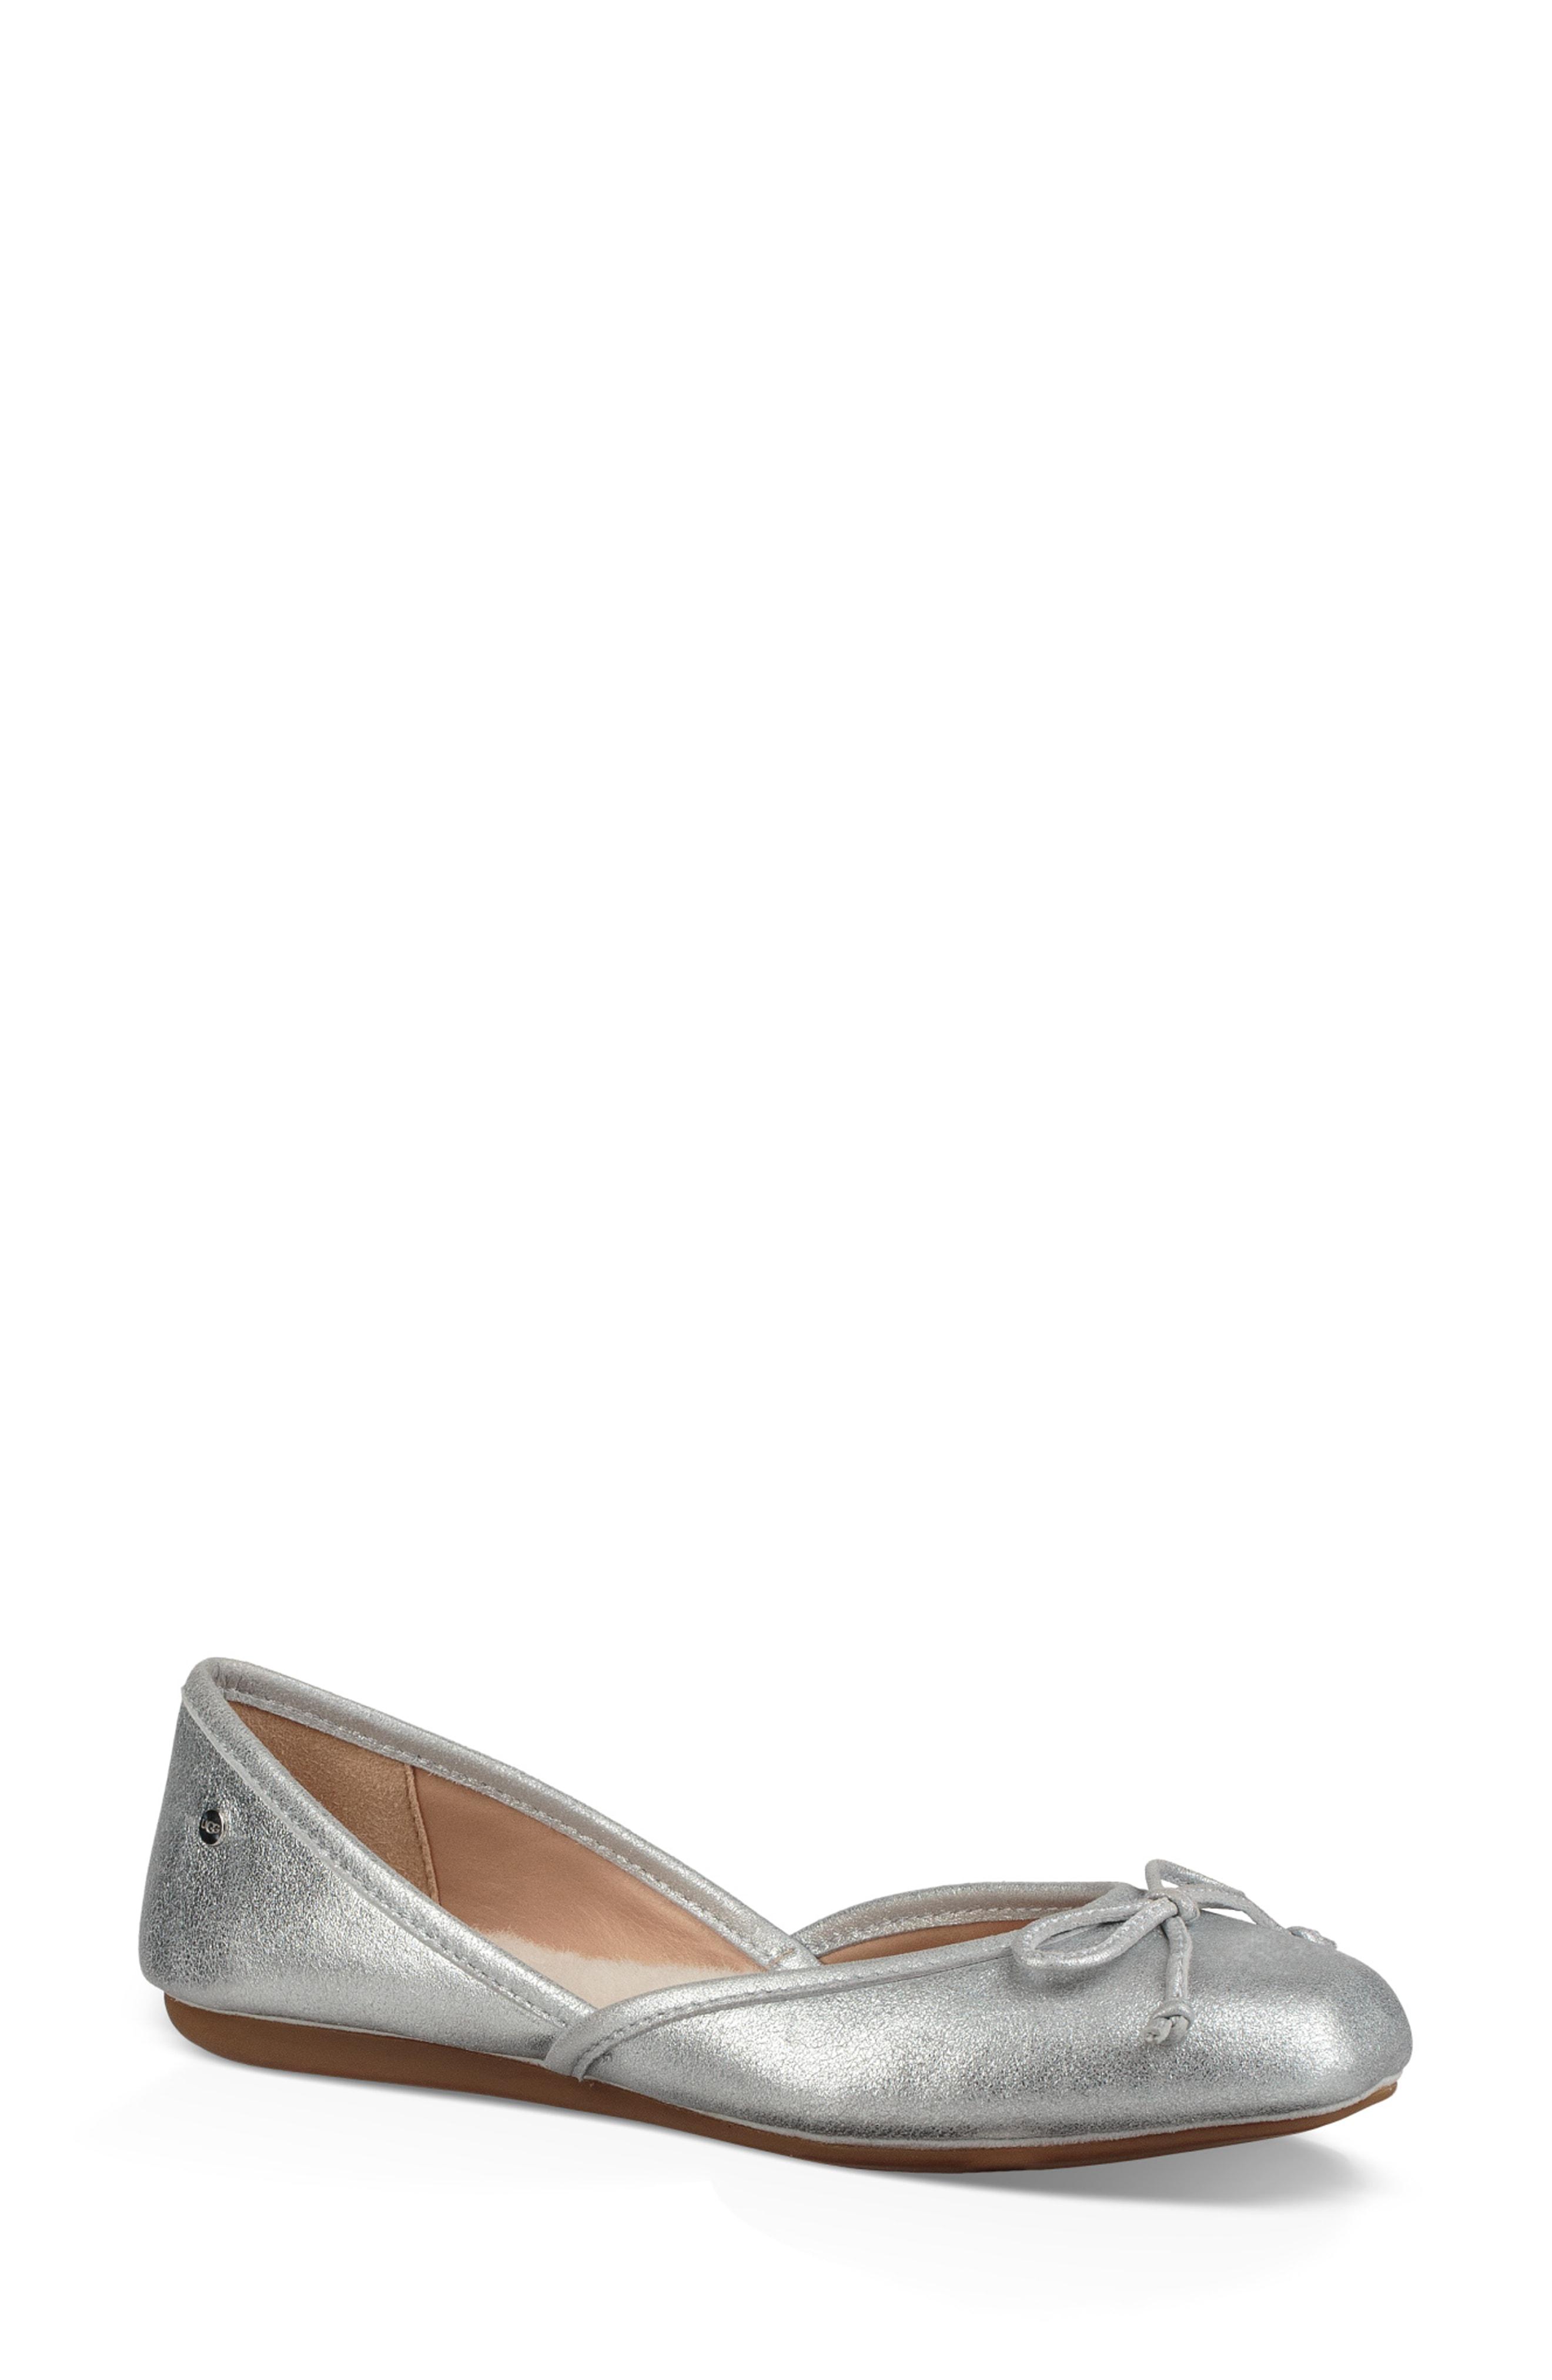 UGG Leather Ugg Lena Flat in Silver 